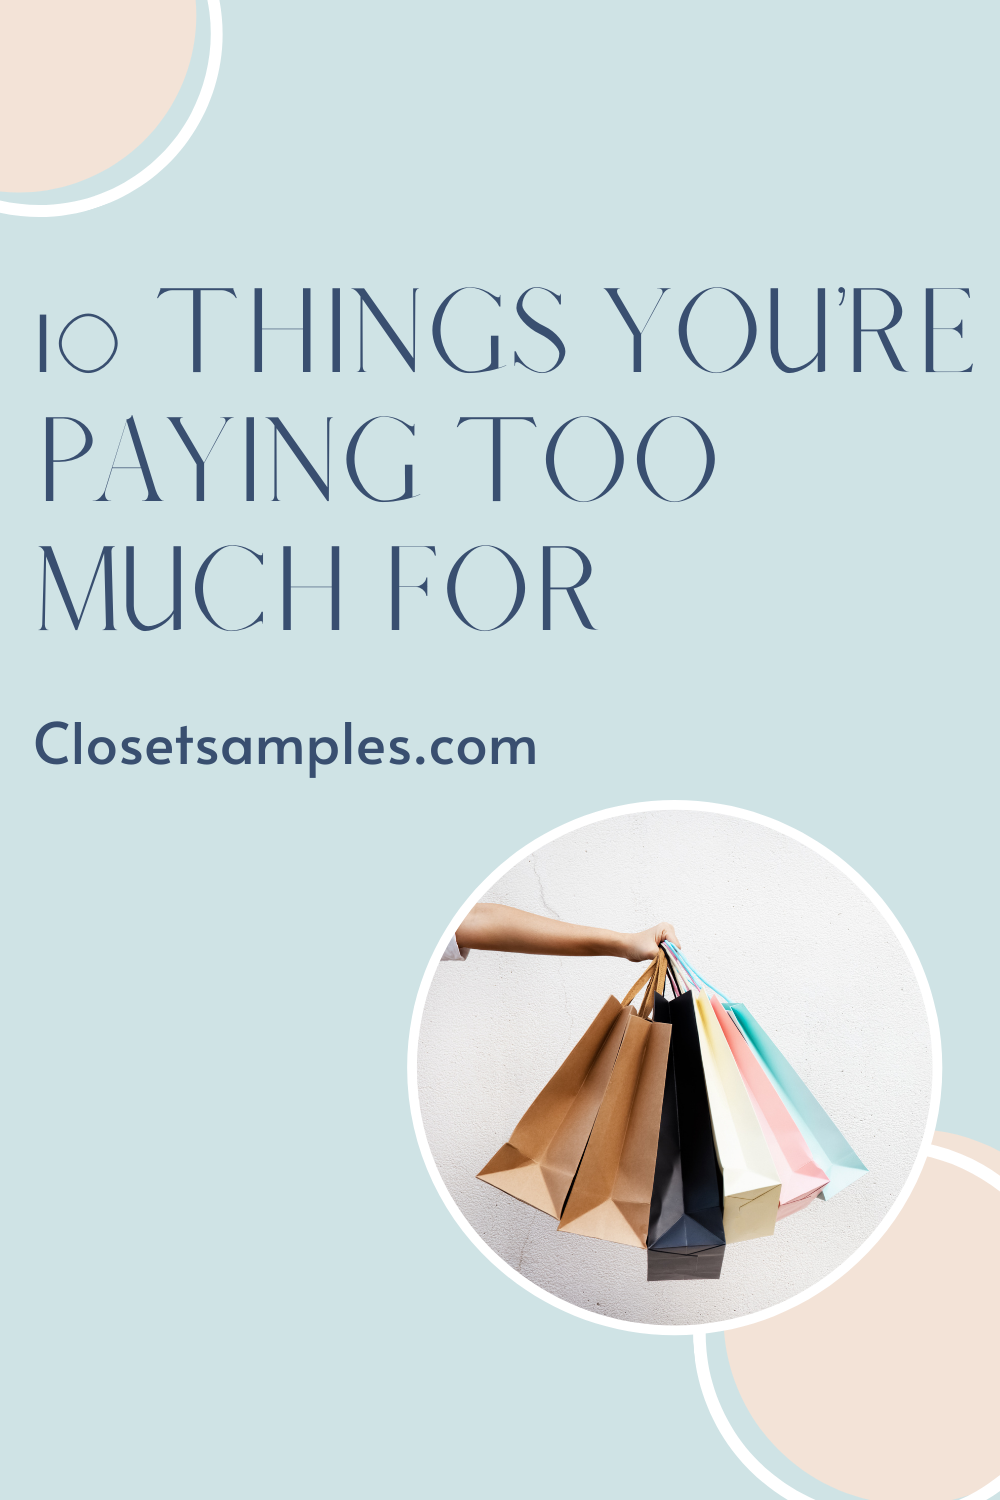 10-Things-Youre-Paying-Too-Much-For-closetsamples-Pinterest.png